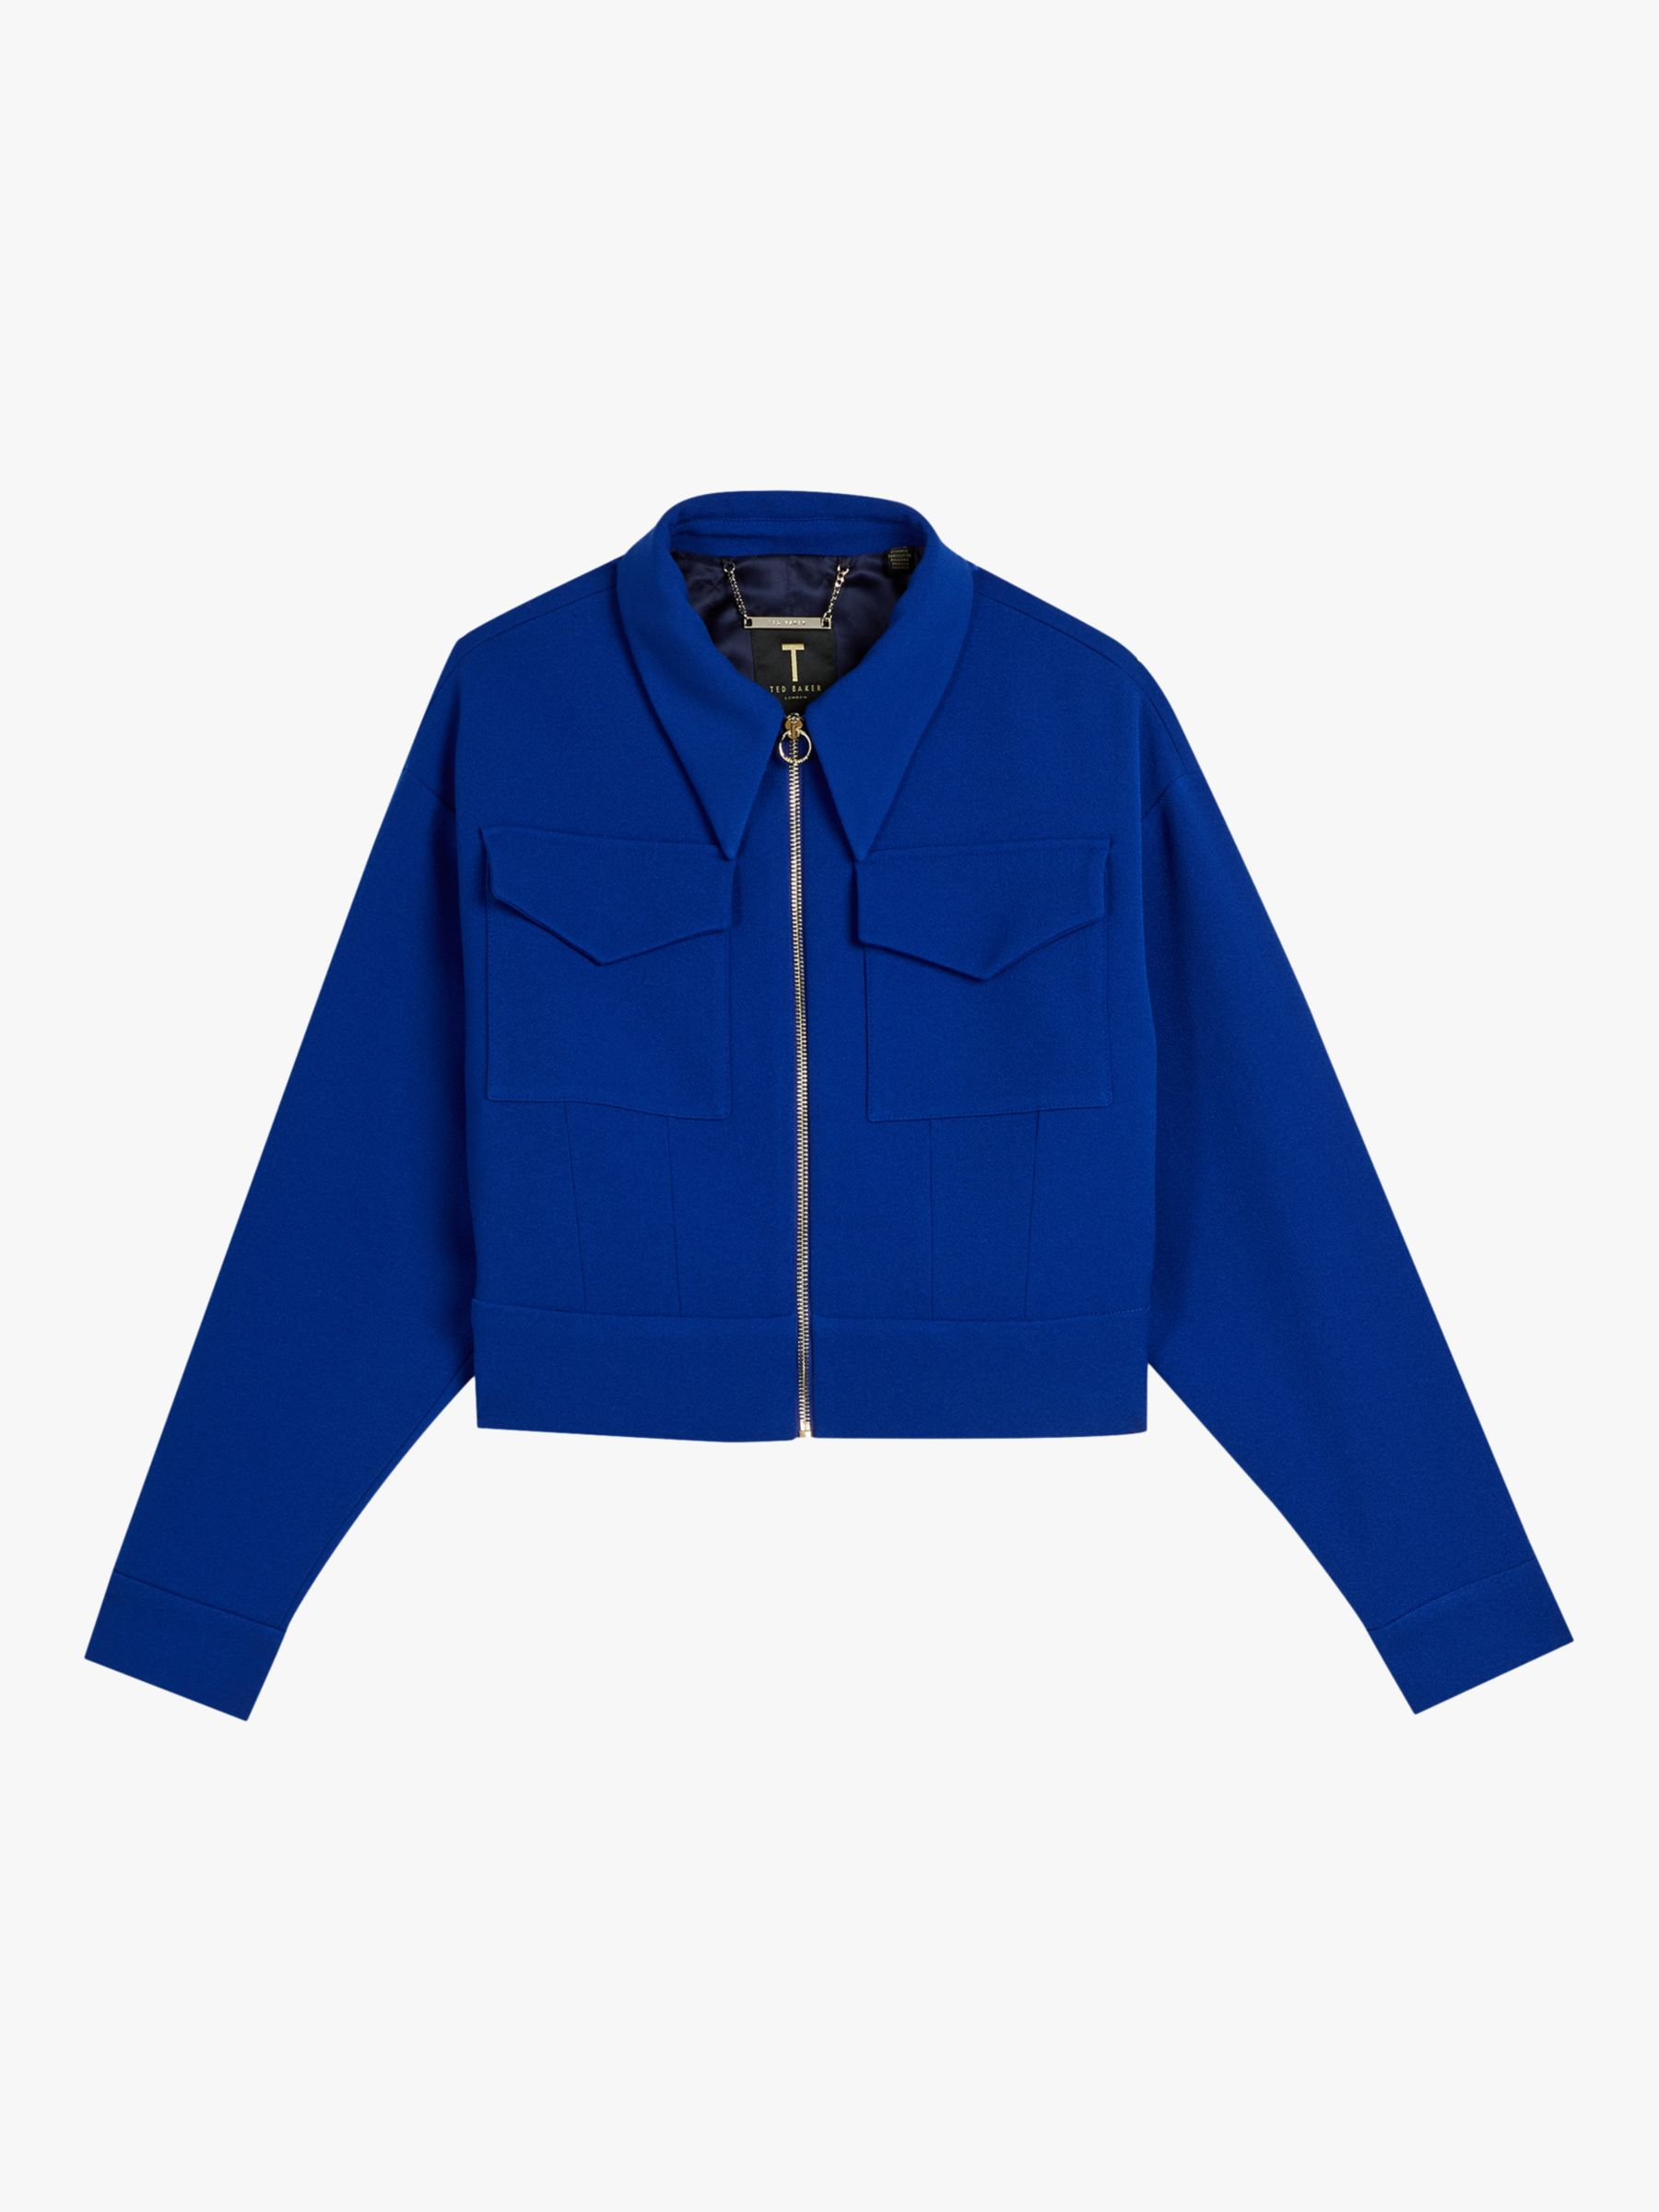 Ted Baker Cropped Zip Up Jacket, Blue at John Lewis & Partners